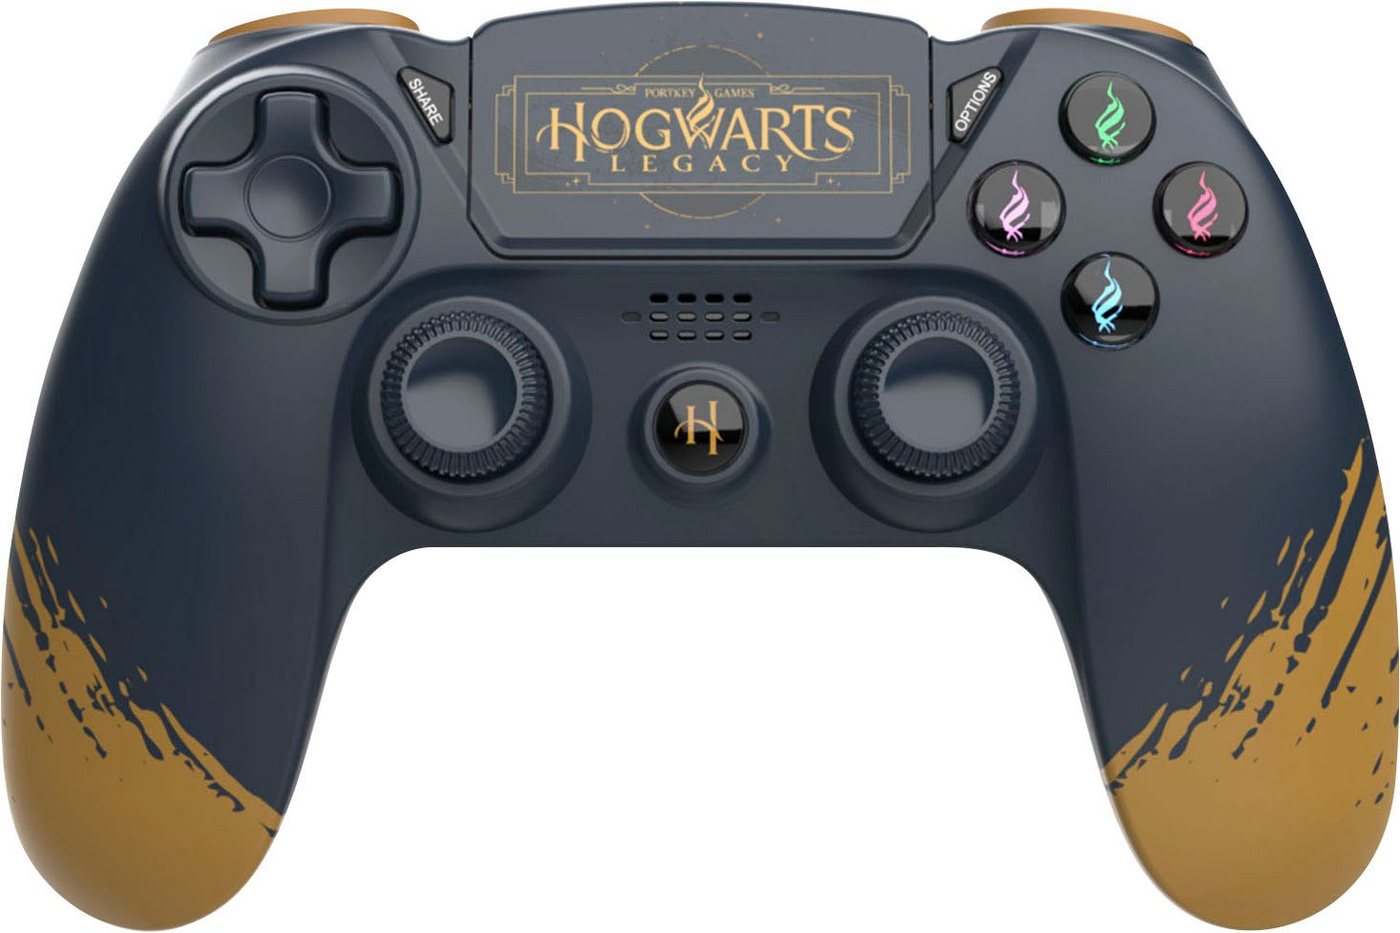 Freaks and Geeks Harry Potter Hogwarts Legacy Wireless Controller PlayStation 4-Controller von Freaks and Geeks